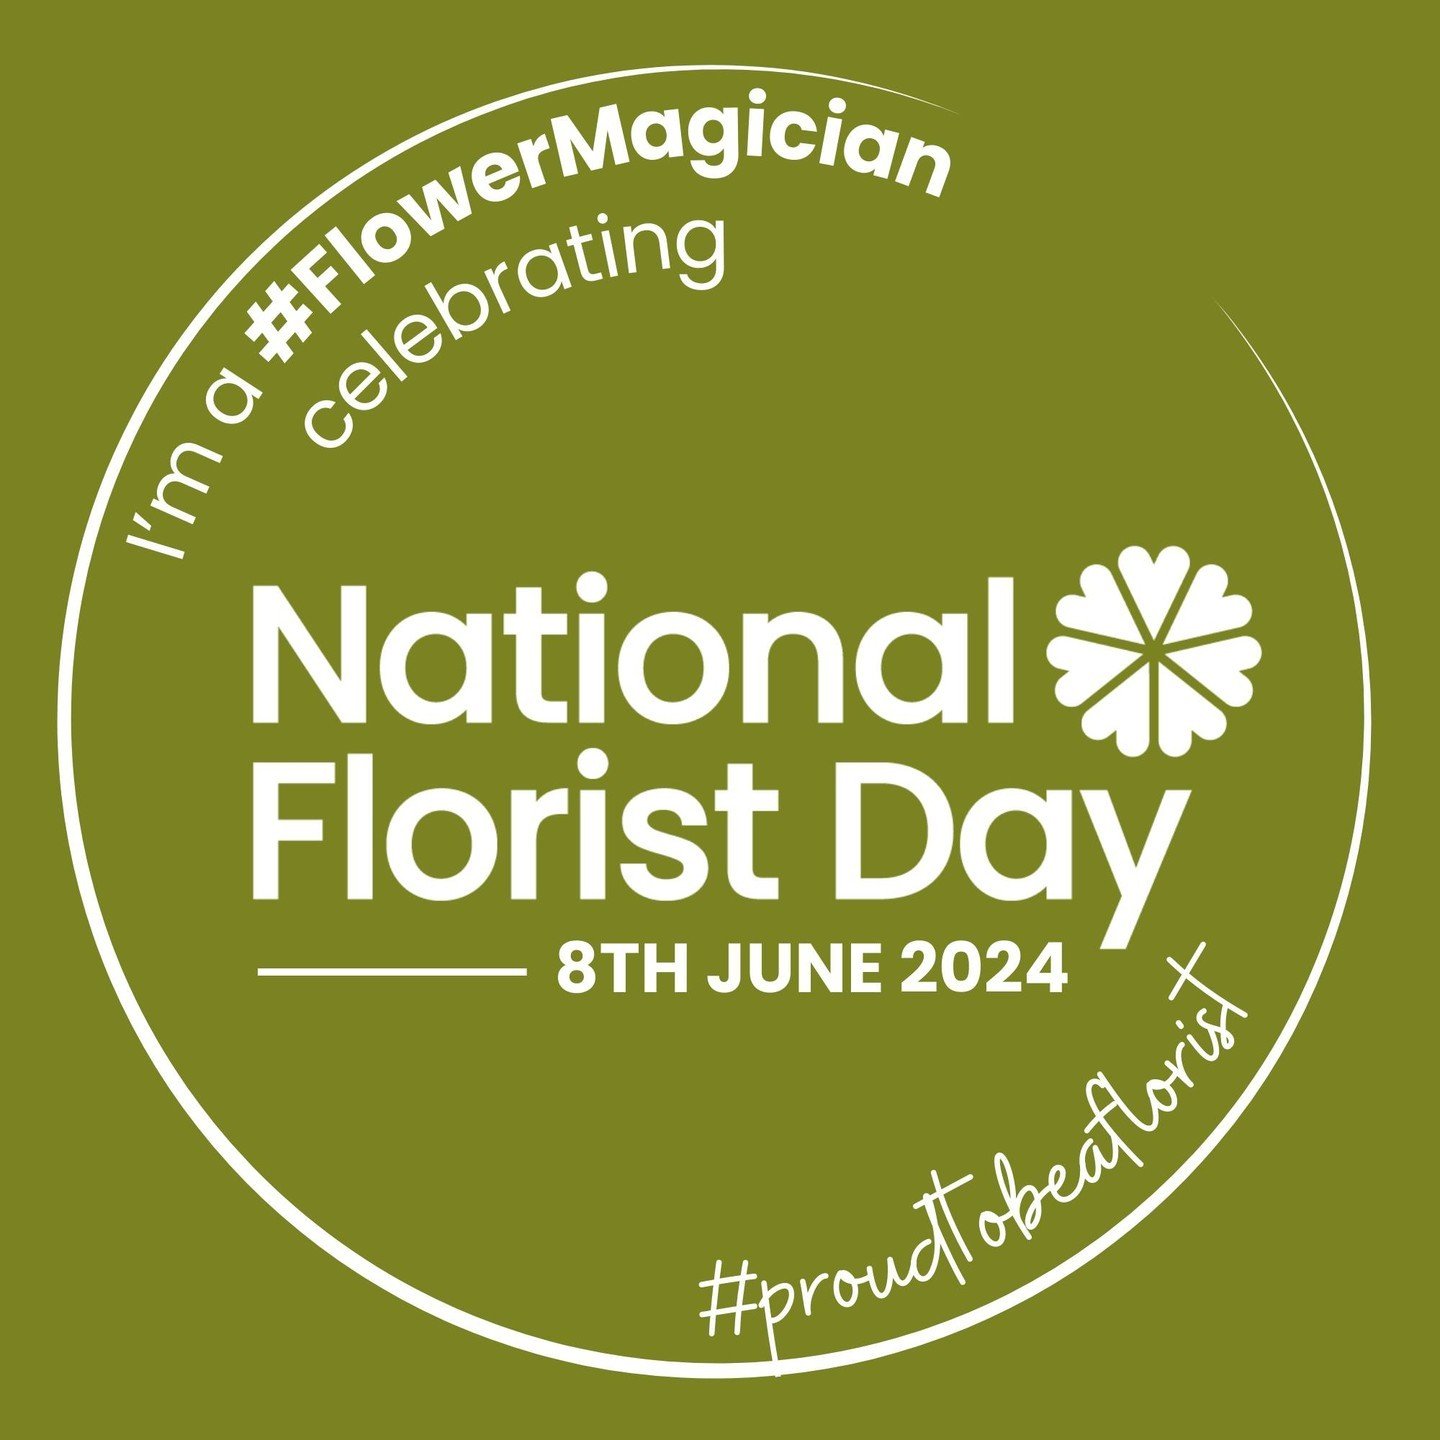 We are looking forward to celebrating #nationalfloristday on 8th June along with hundreds of Florists across UK and Ireland.  Keep your eyes peeled for more information on what we will be getting up to.⁠
⁠
#nationalfloristday #creatingmagicwithflower